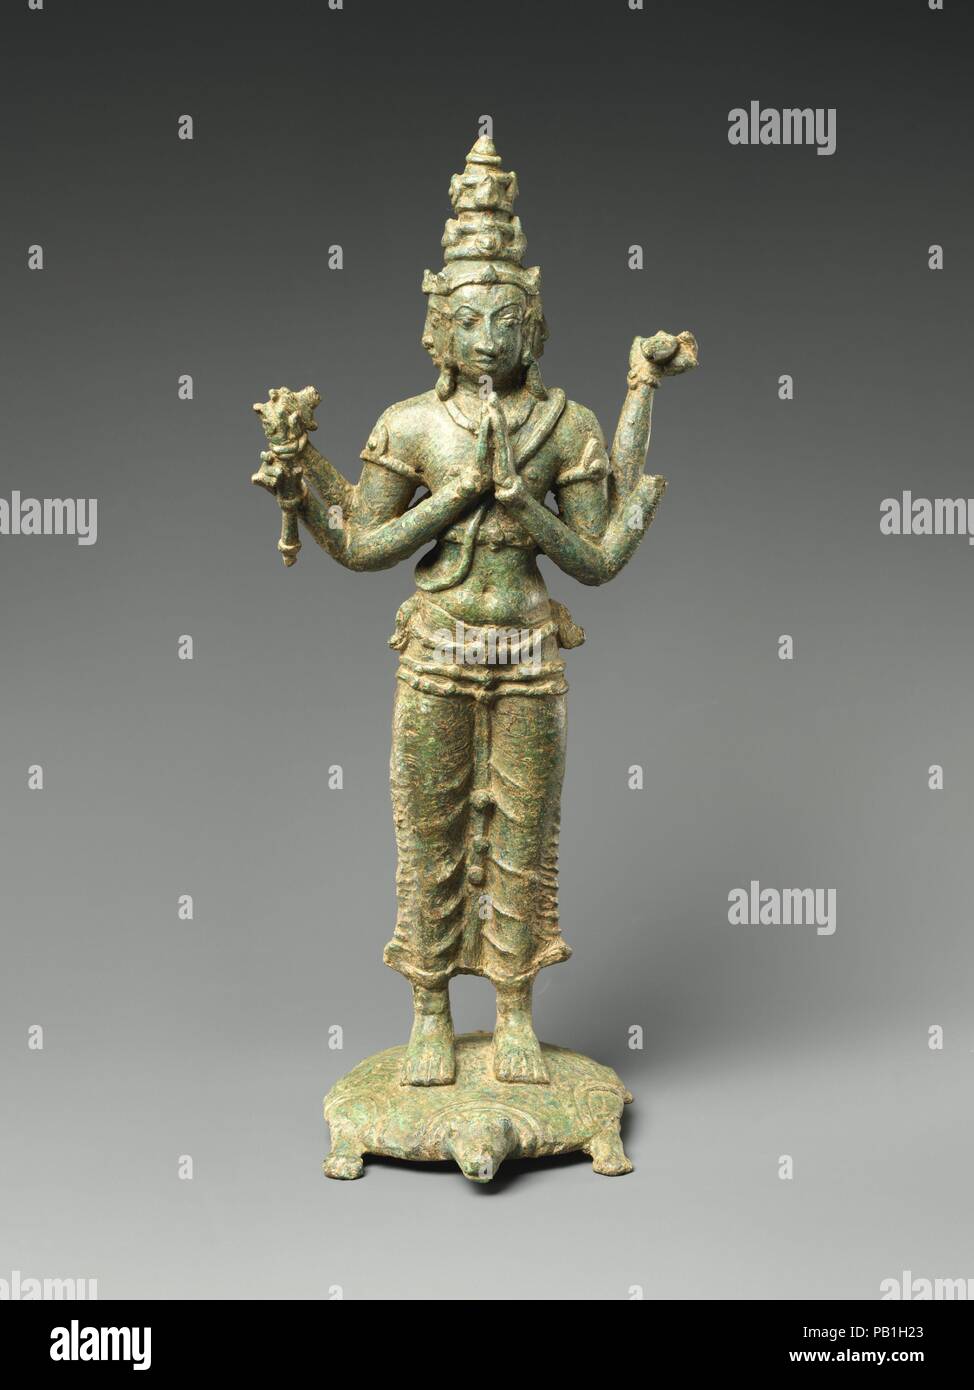 Brahma Standing On A Turtle Surrounded By The Four Lokapalas Guardians Of The Cardinal Directions Culture Sri Lanka Dimensions H 12 1 2 In 31 8 Cm W 3 3 8 In 8 6 Cm D